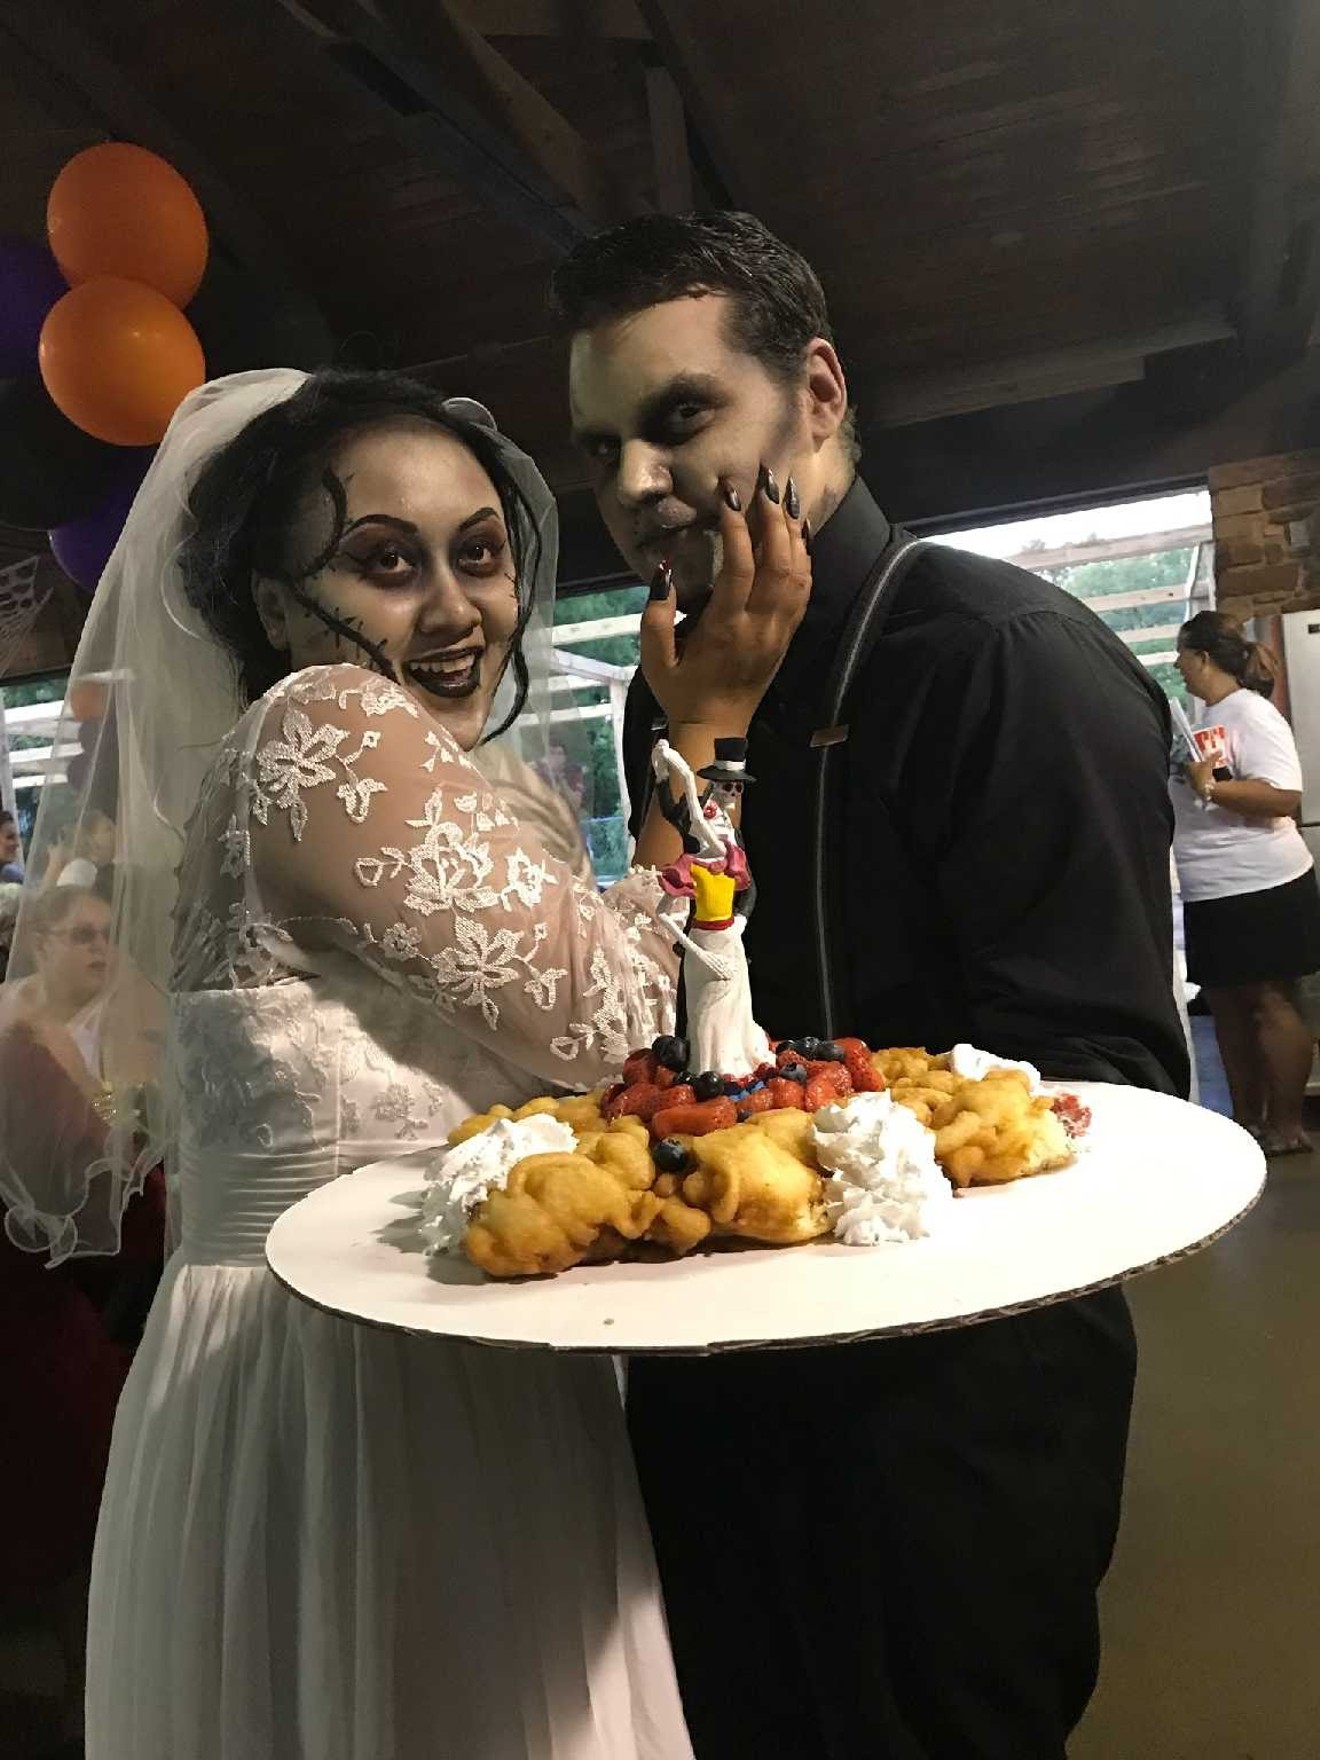 Ethan and Chantra Briggs prepare to share a bite of their funnel wedding cake at a Halloween-themed wedding ceremony at Six Flags Over Texas.